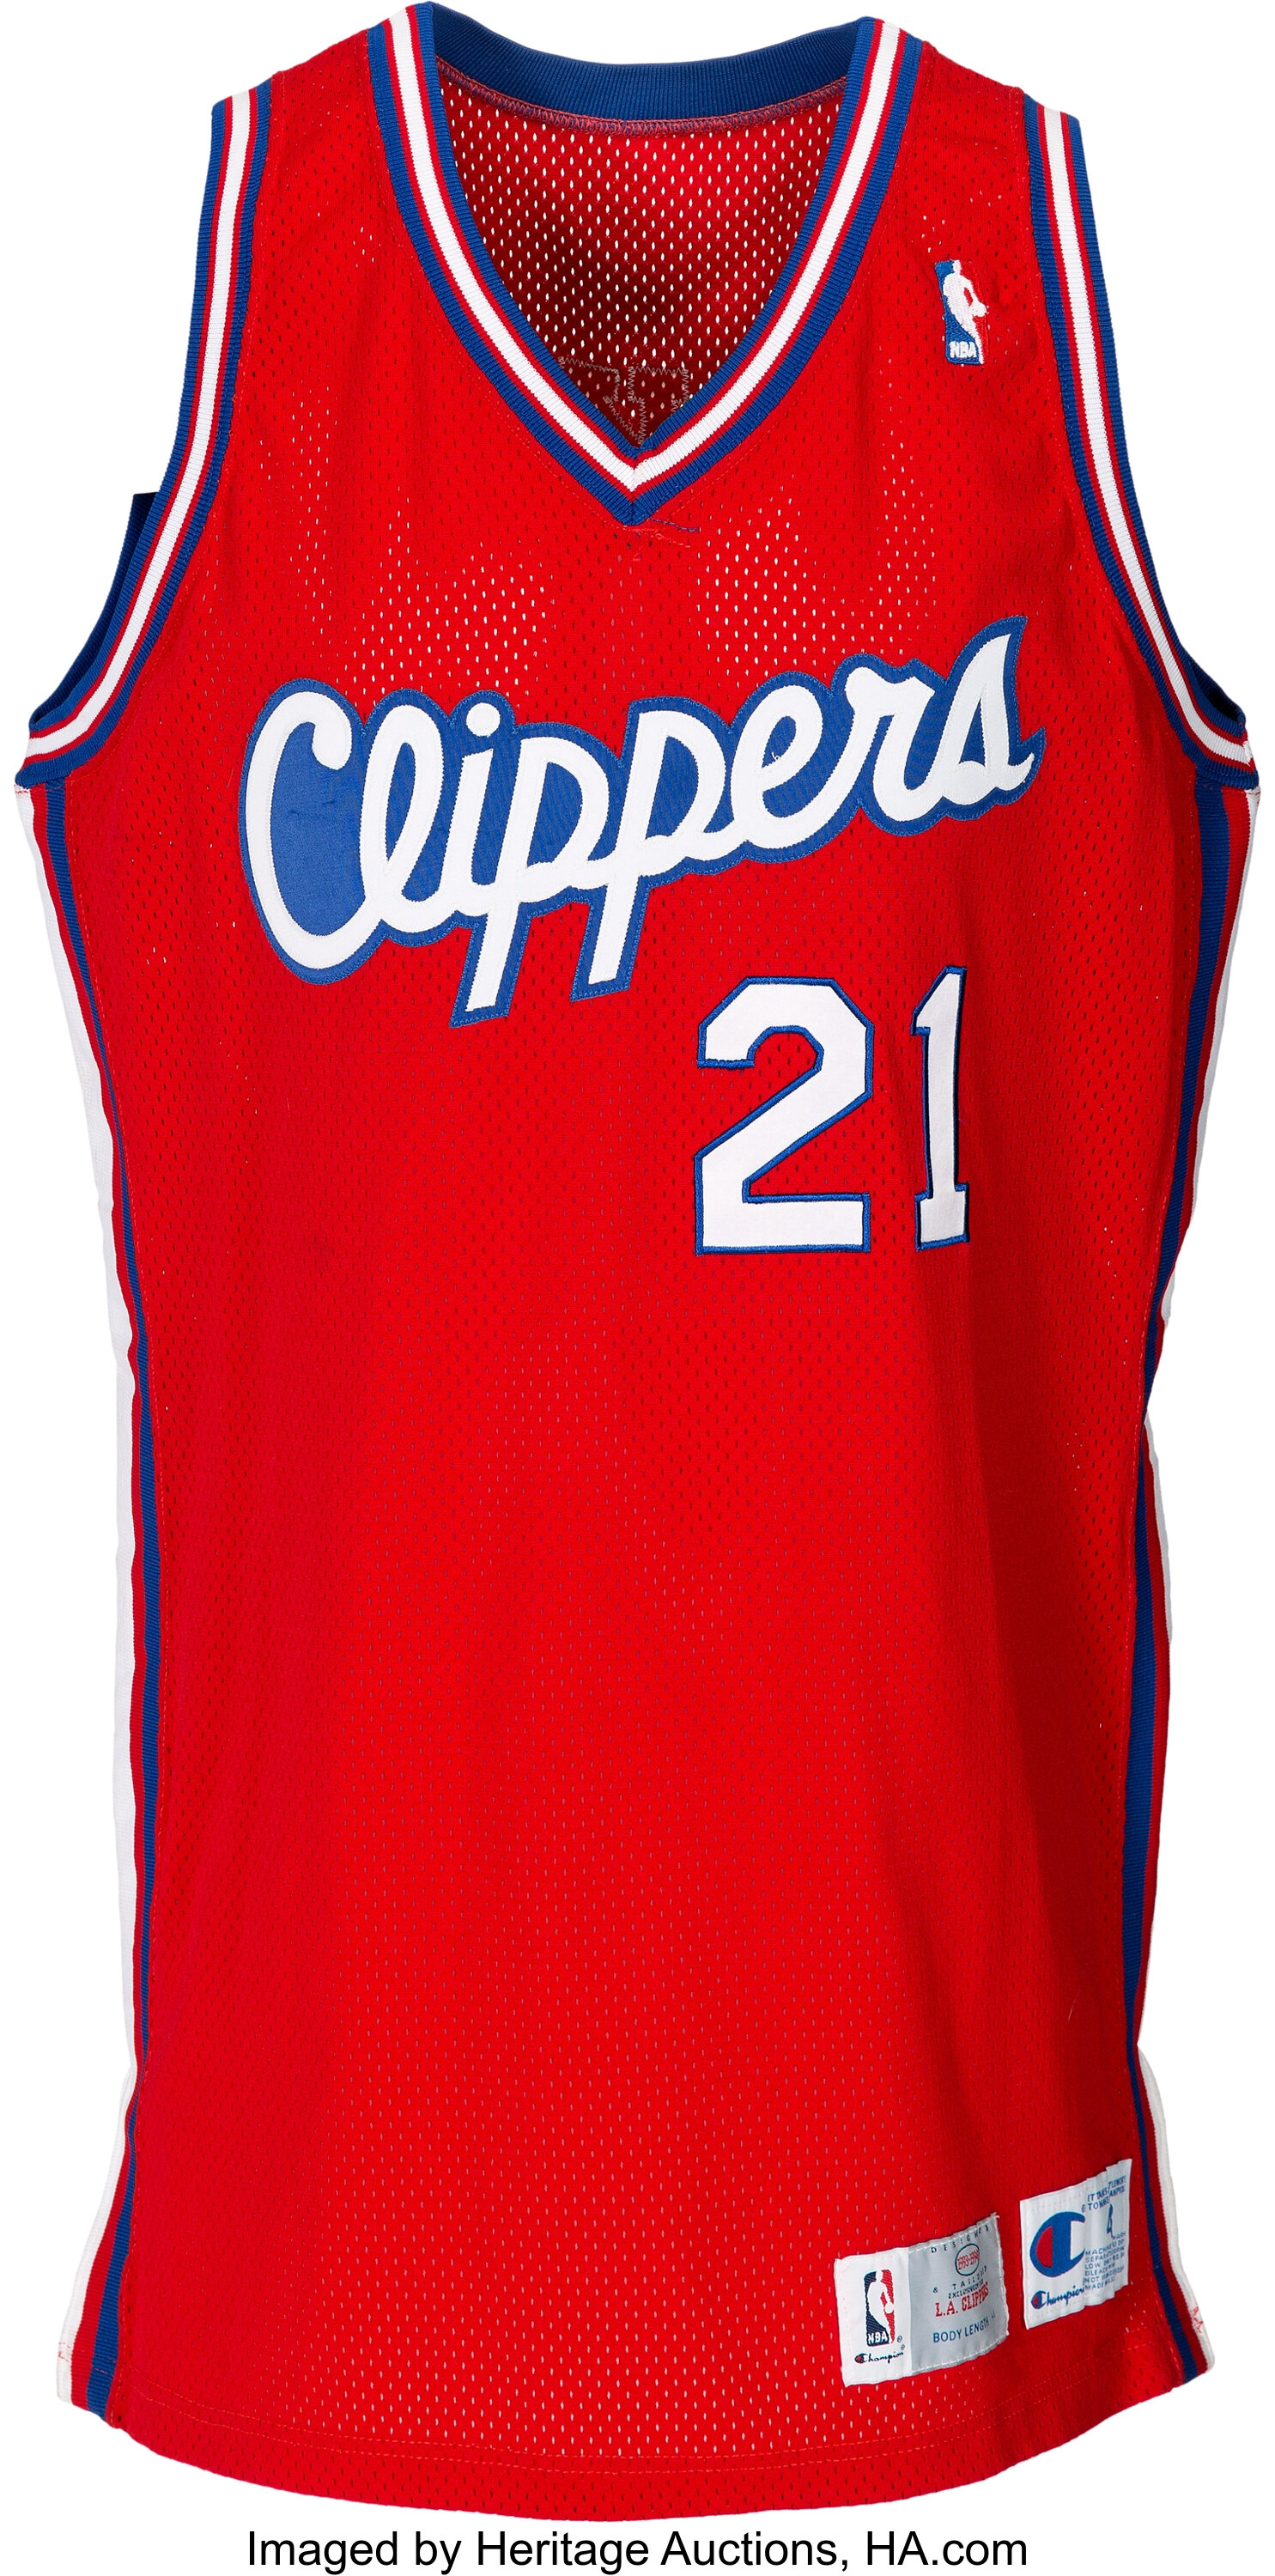 Los Angeles Clippers Home Uniform - National Basketball